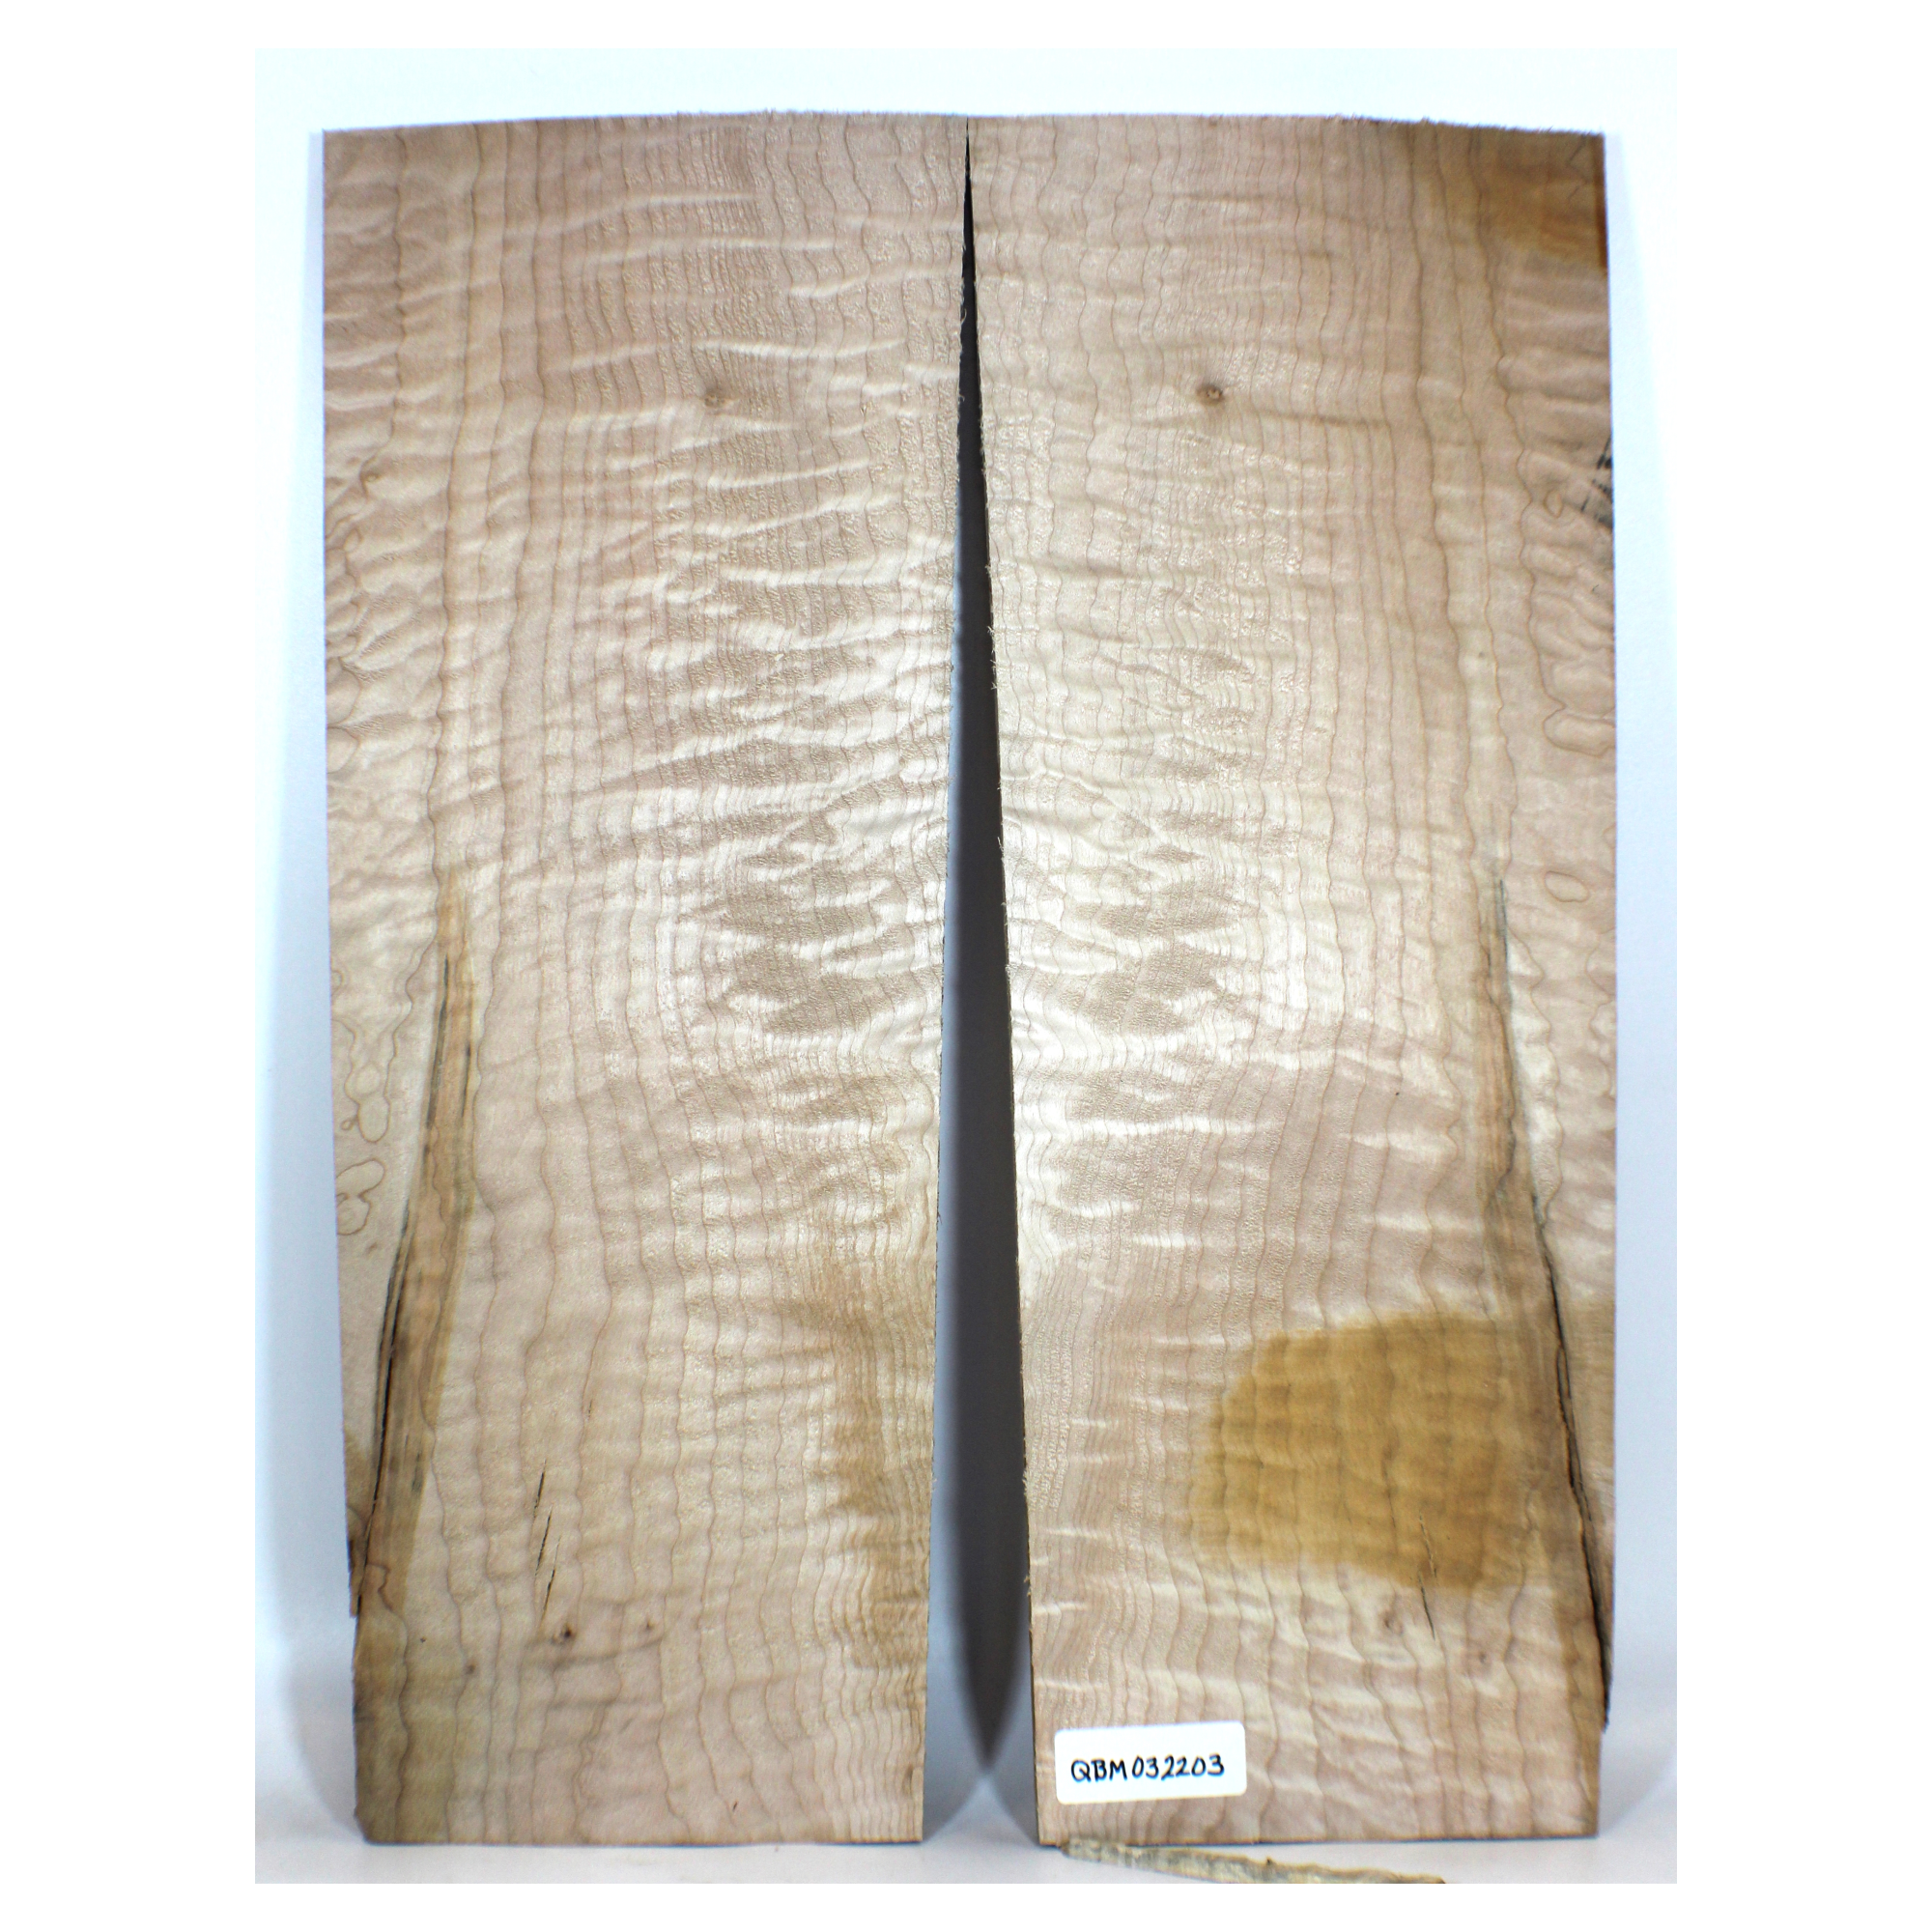 2-piece quilted maple book-matched set.  3A grade figure throughout with color streak, pin knots and face check on sides.  Dimensions: Thickness (each piece) .675